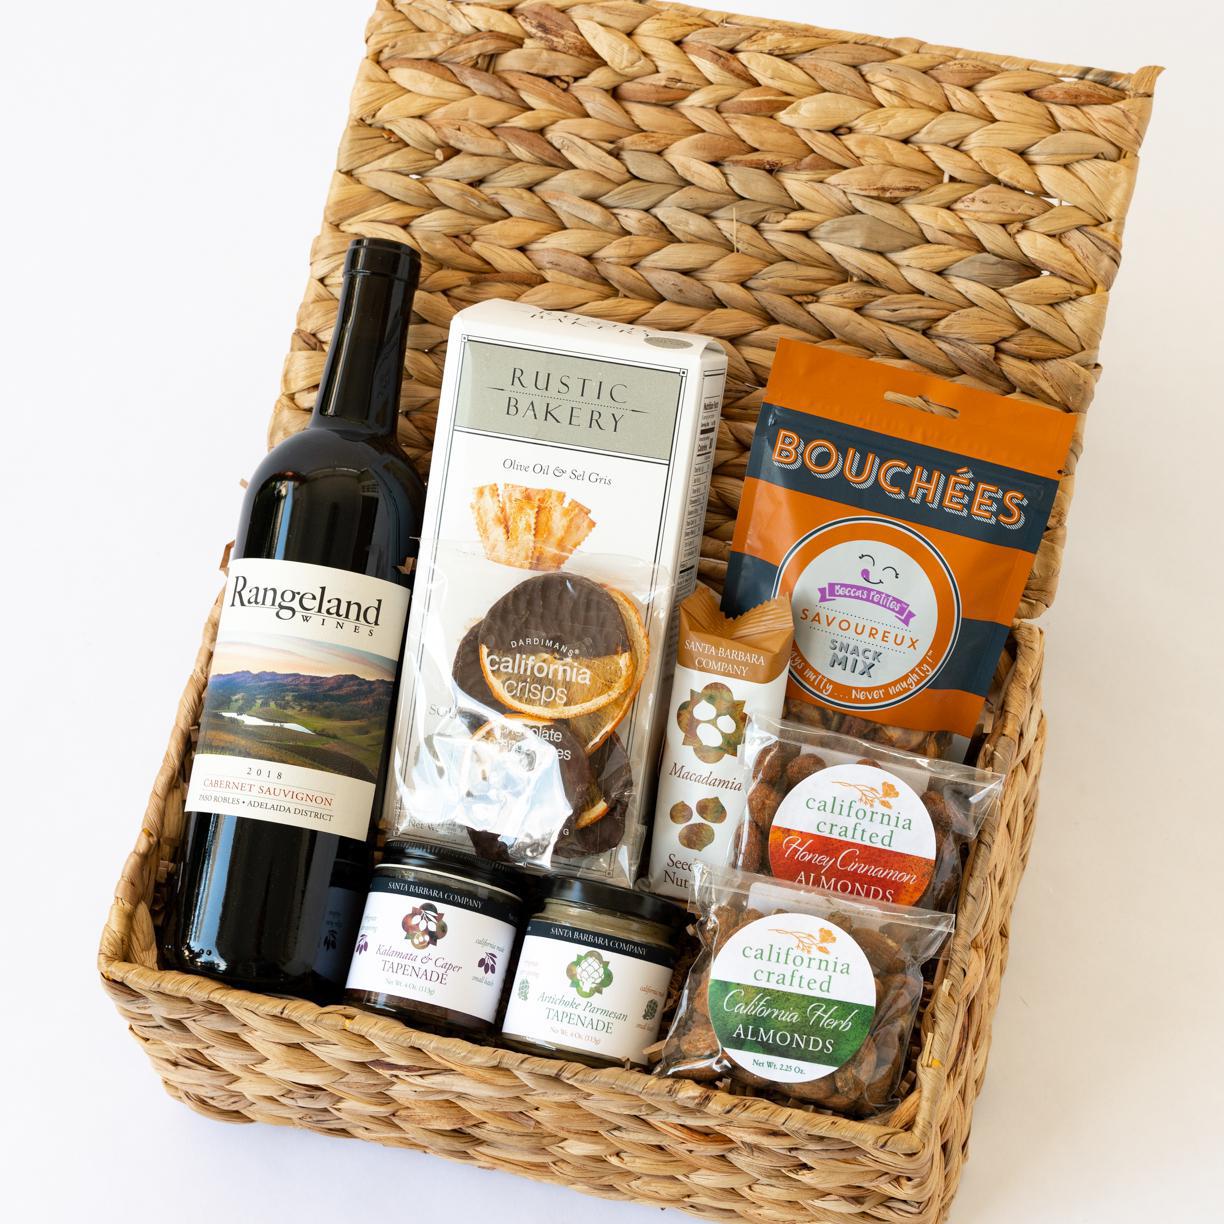 Gift basket filled with wine, sourdough botes, bouches, tapenade, almonds, chocolate dipped oranges and a macadamia bar